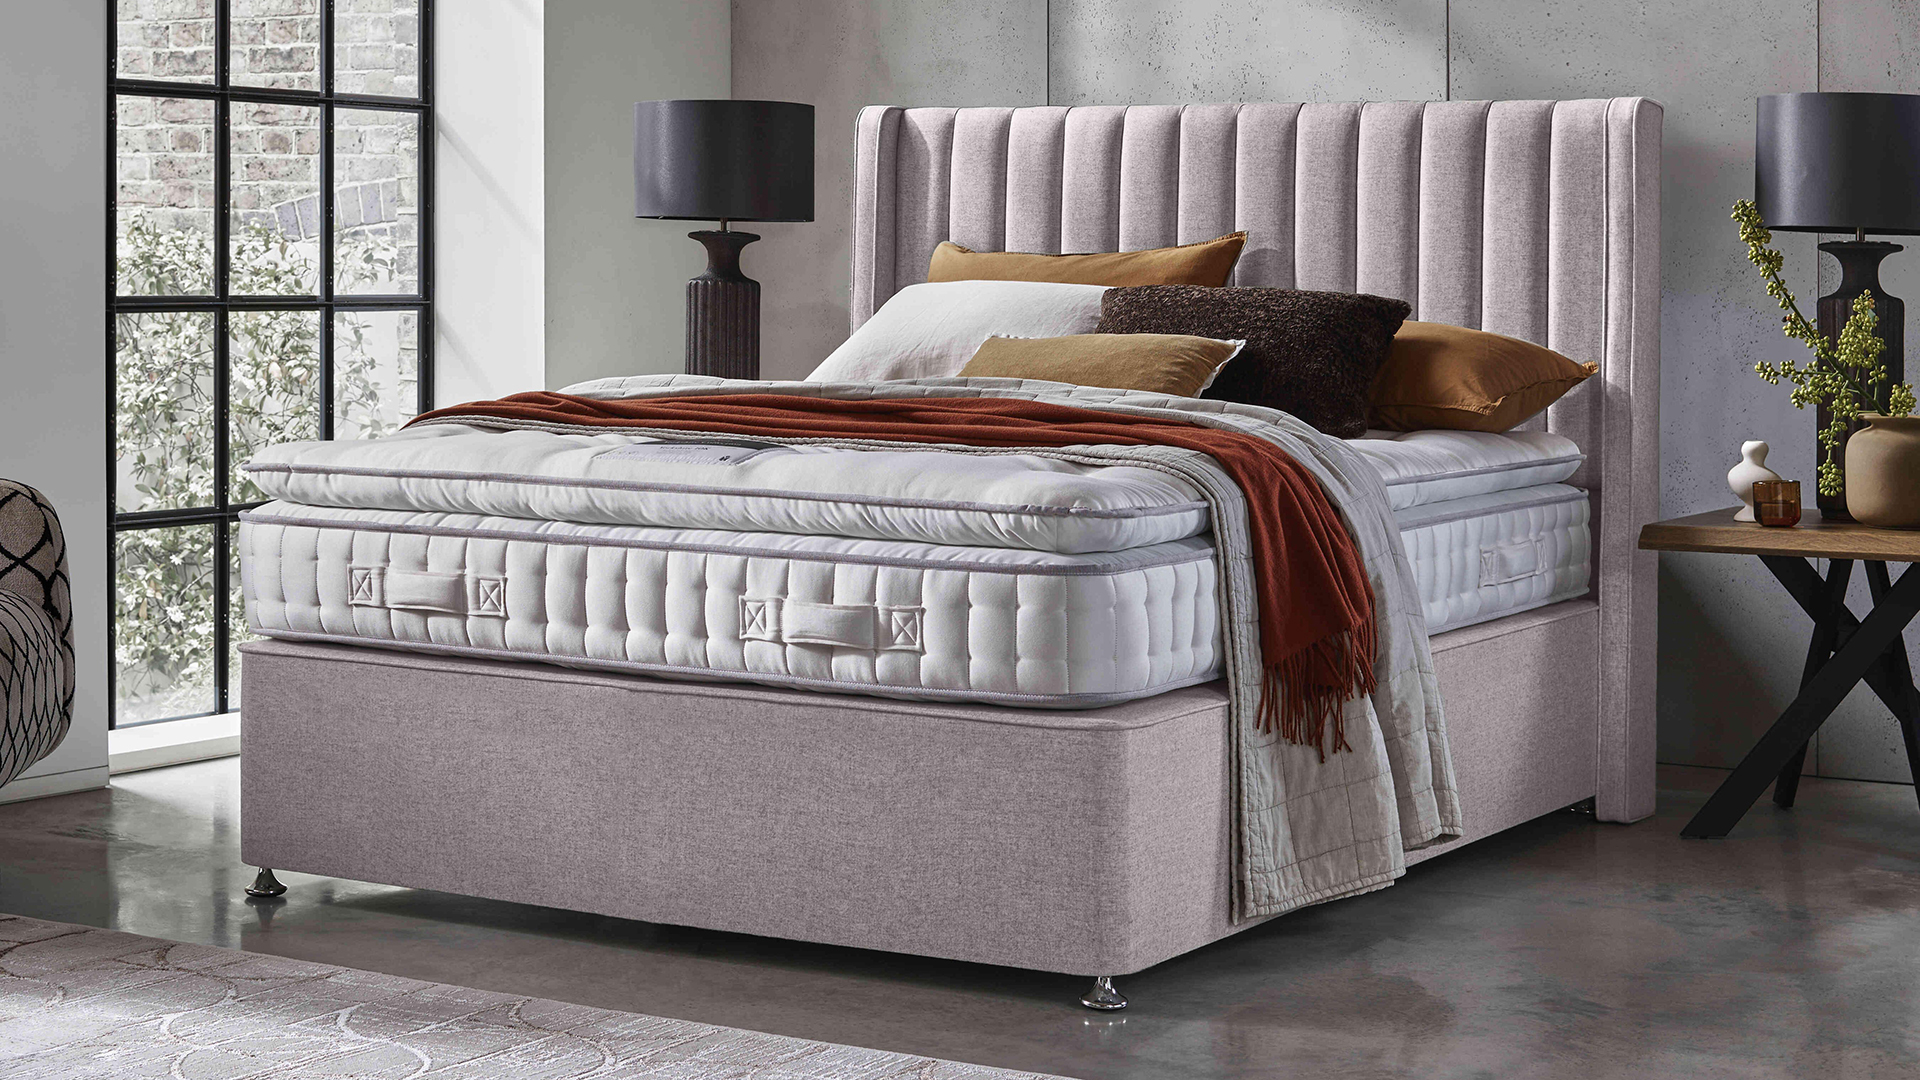 5 reasons you don’t need a pillow-top mattress (and 2 reasons why you ...